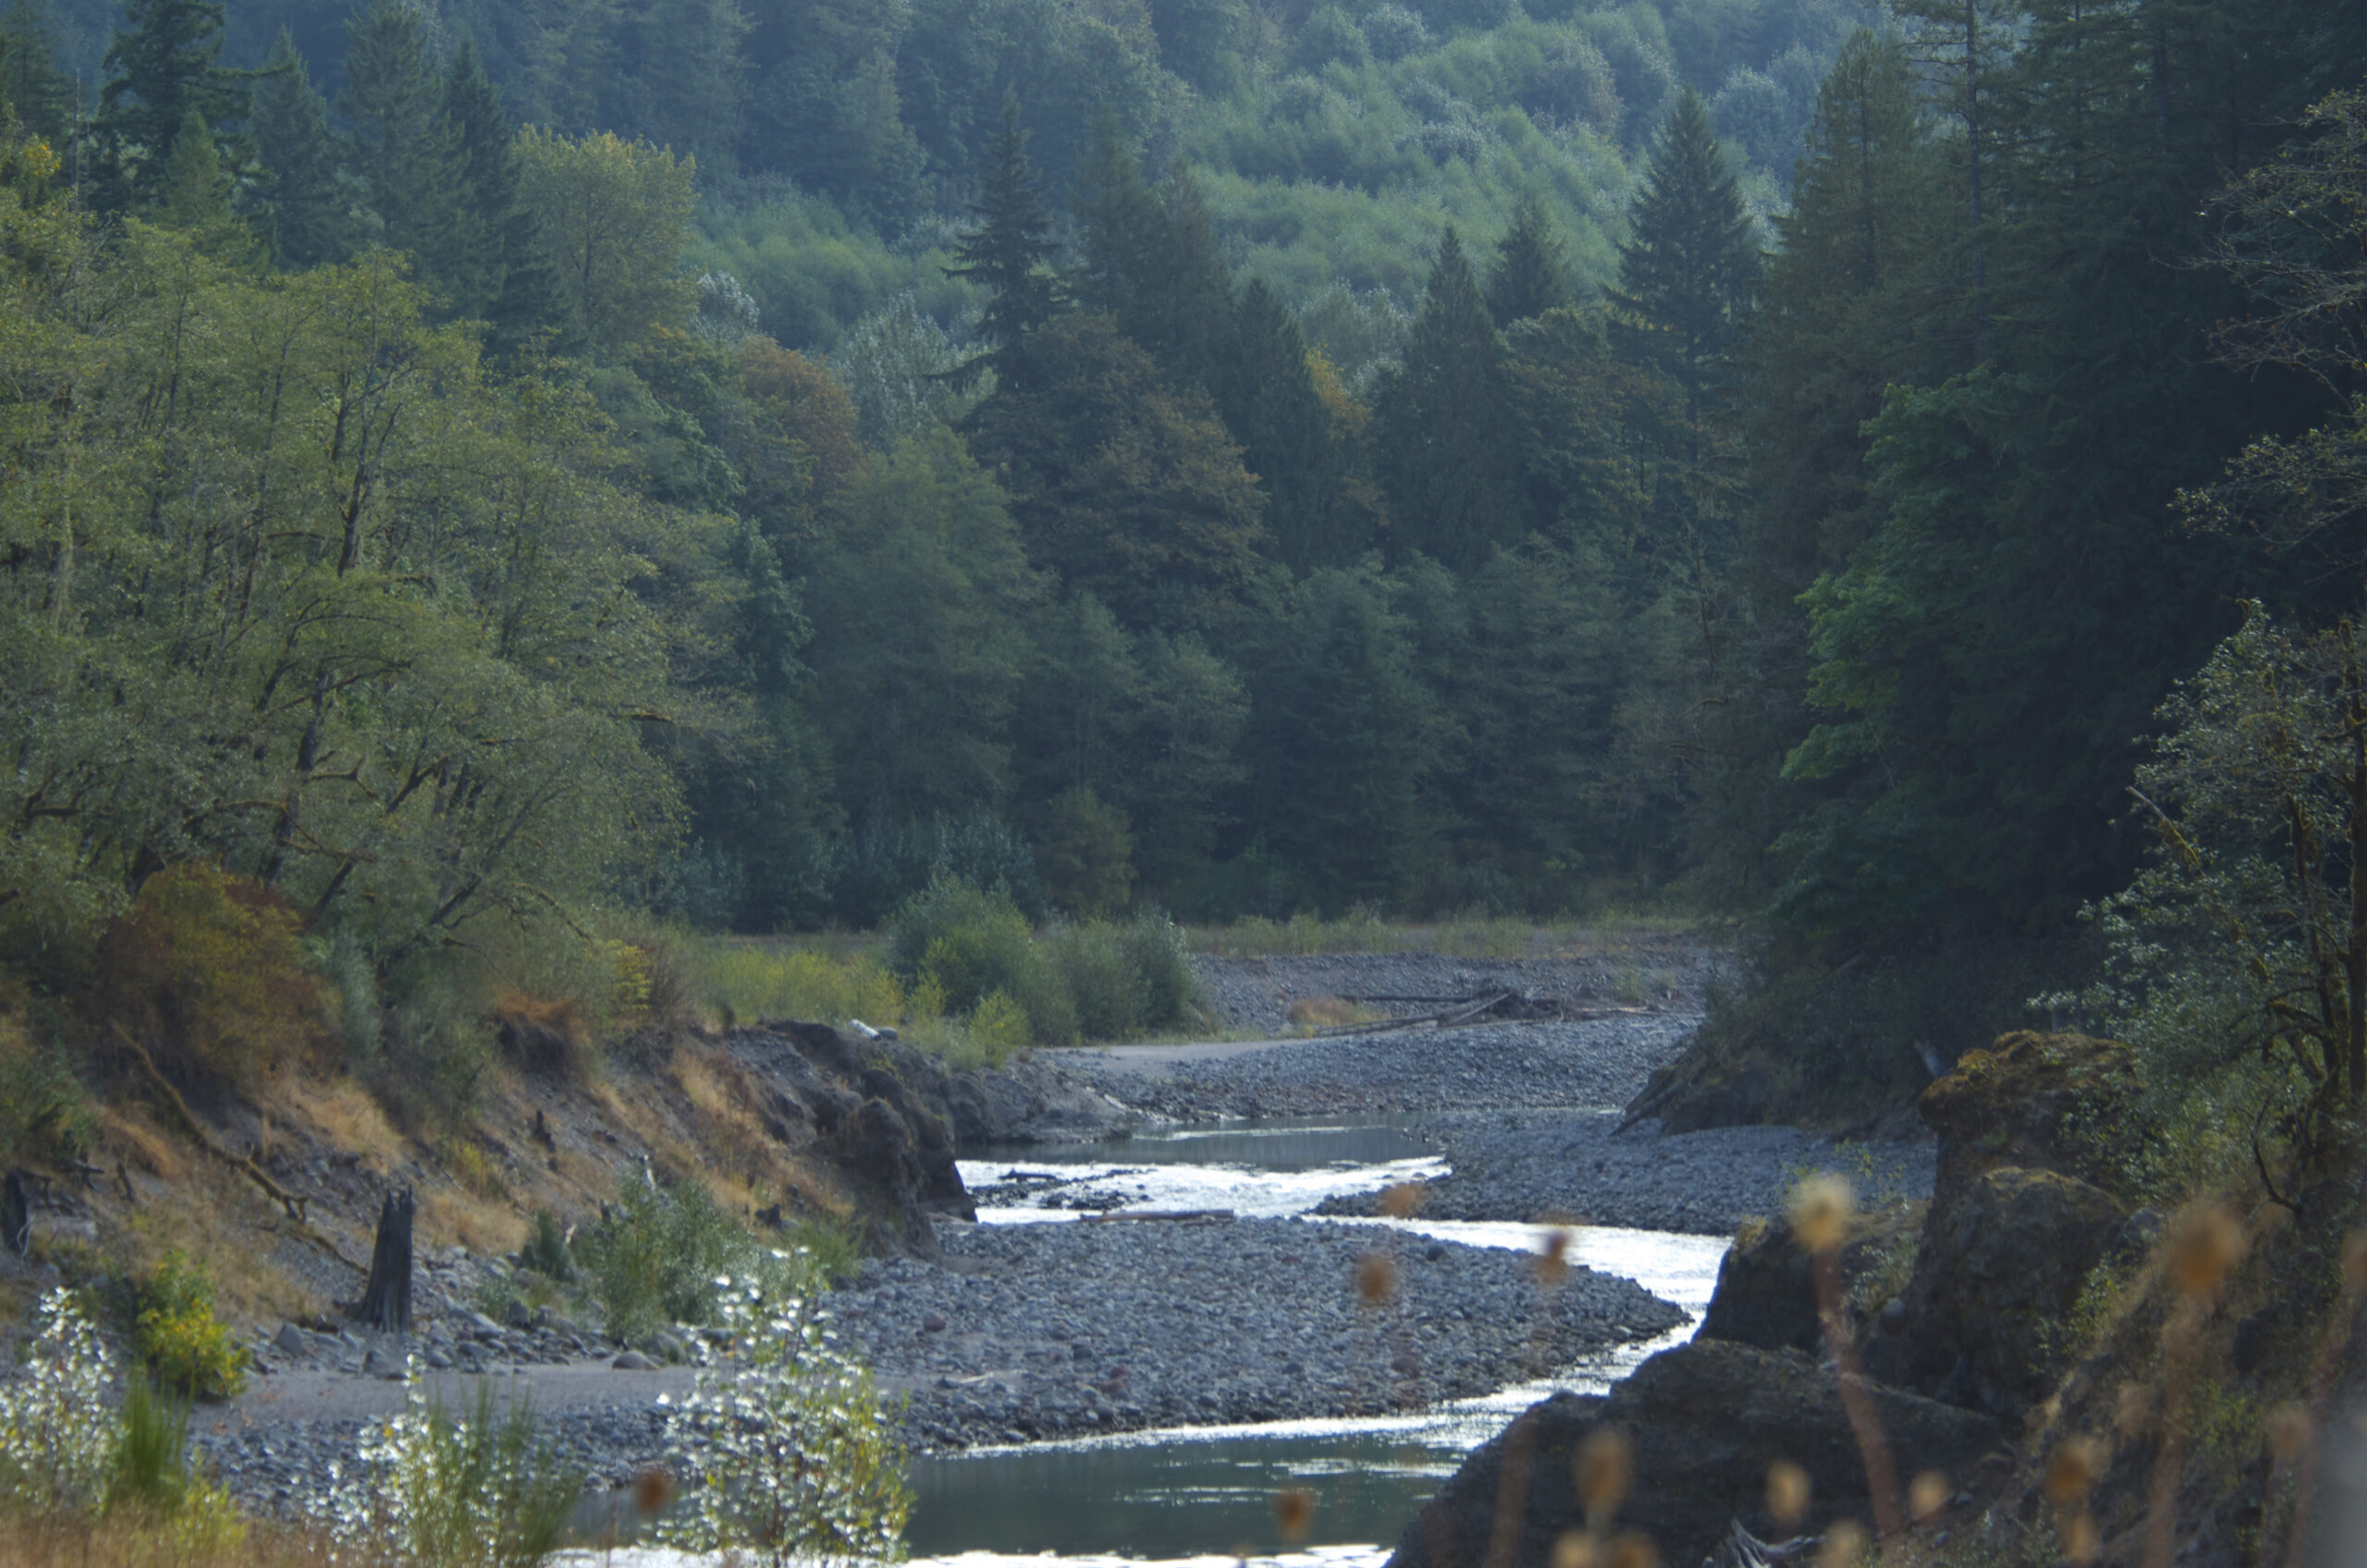 The wild and scenic Sandy River